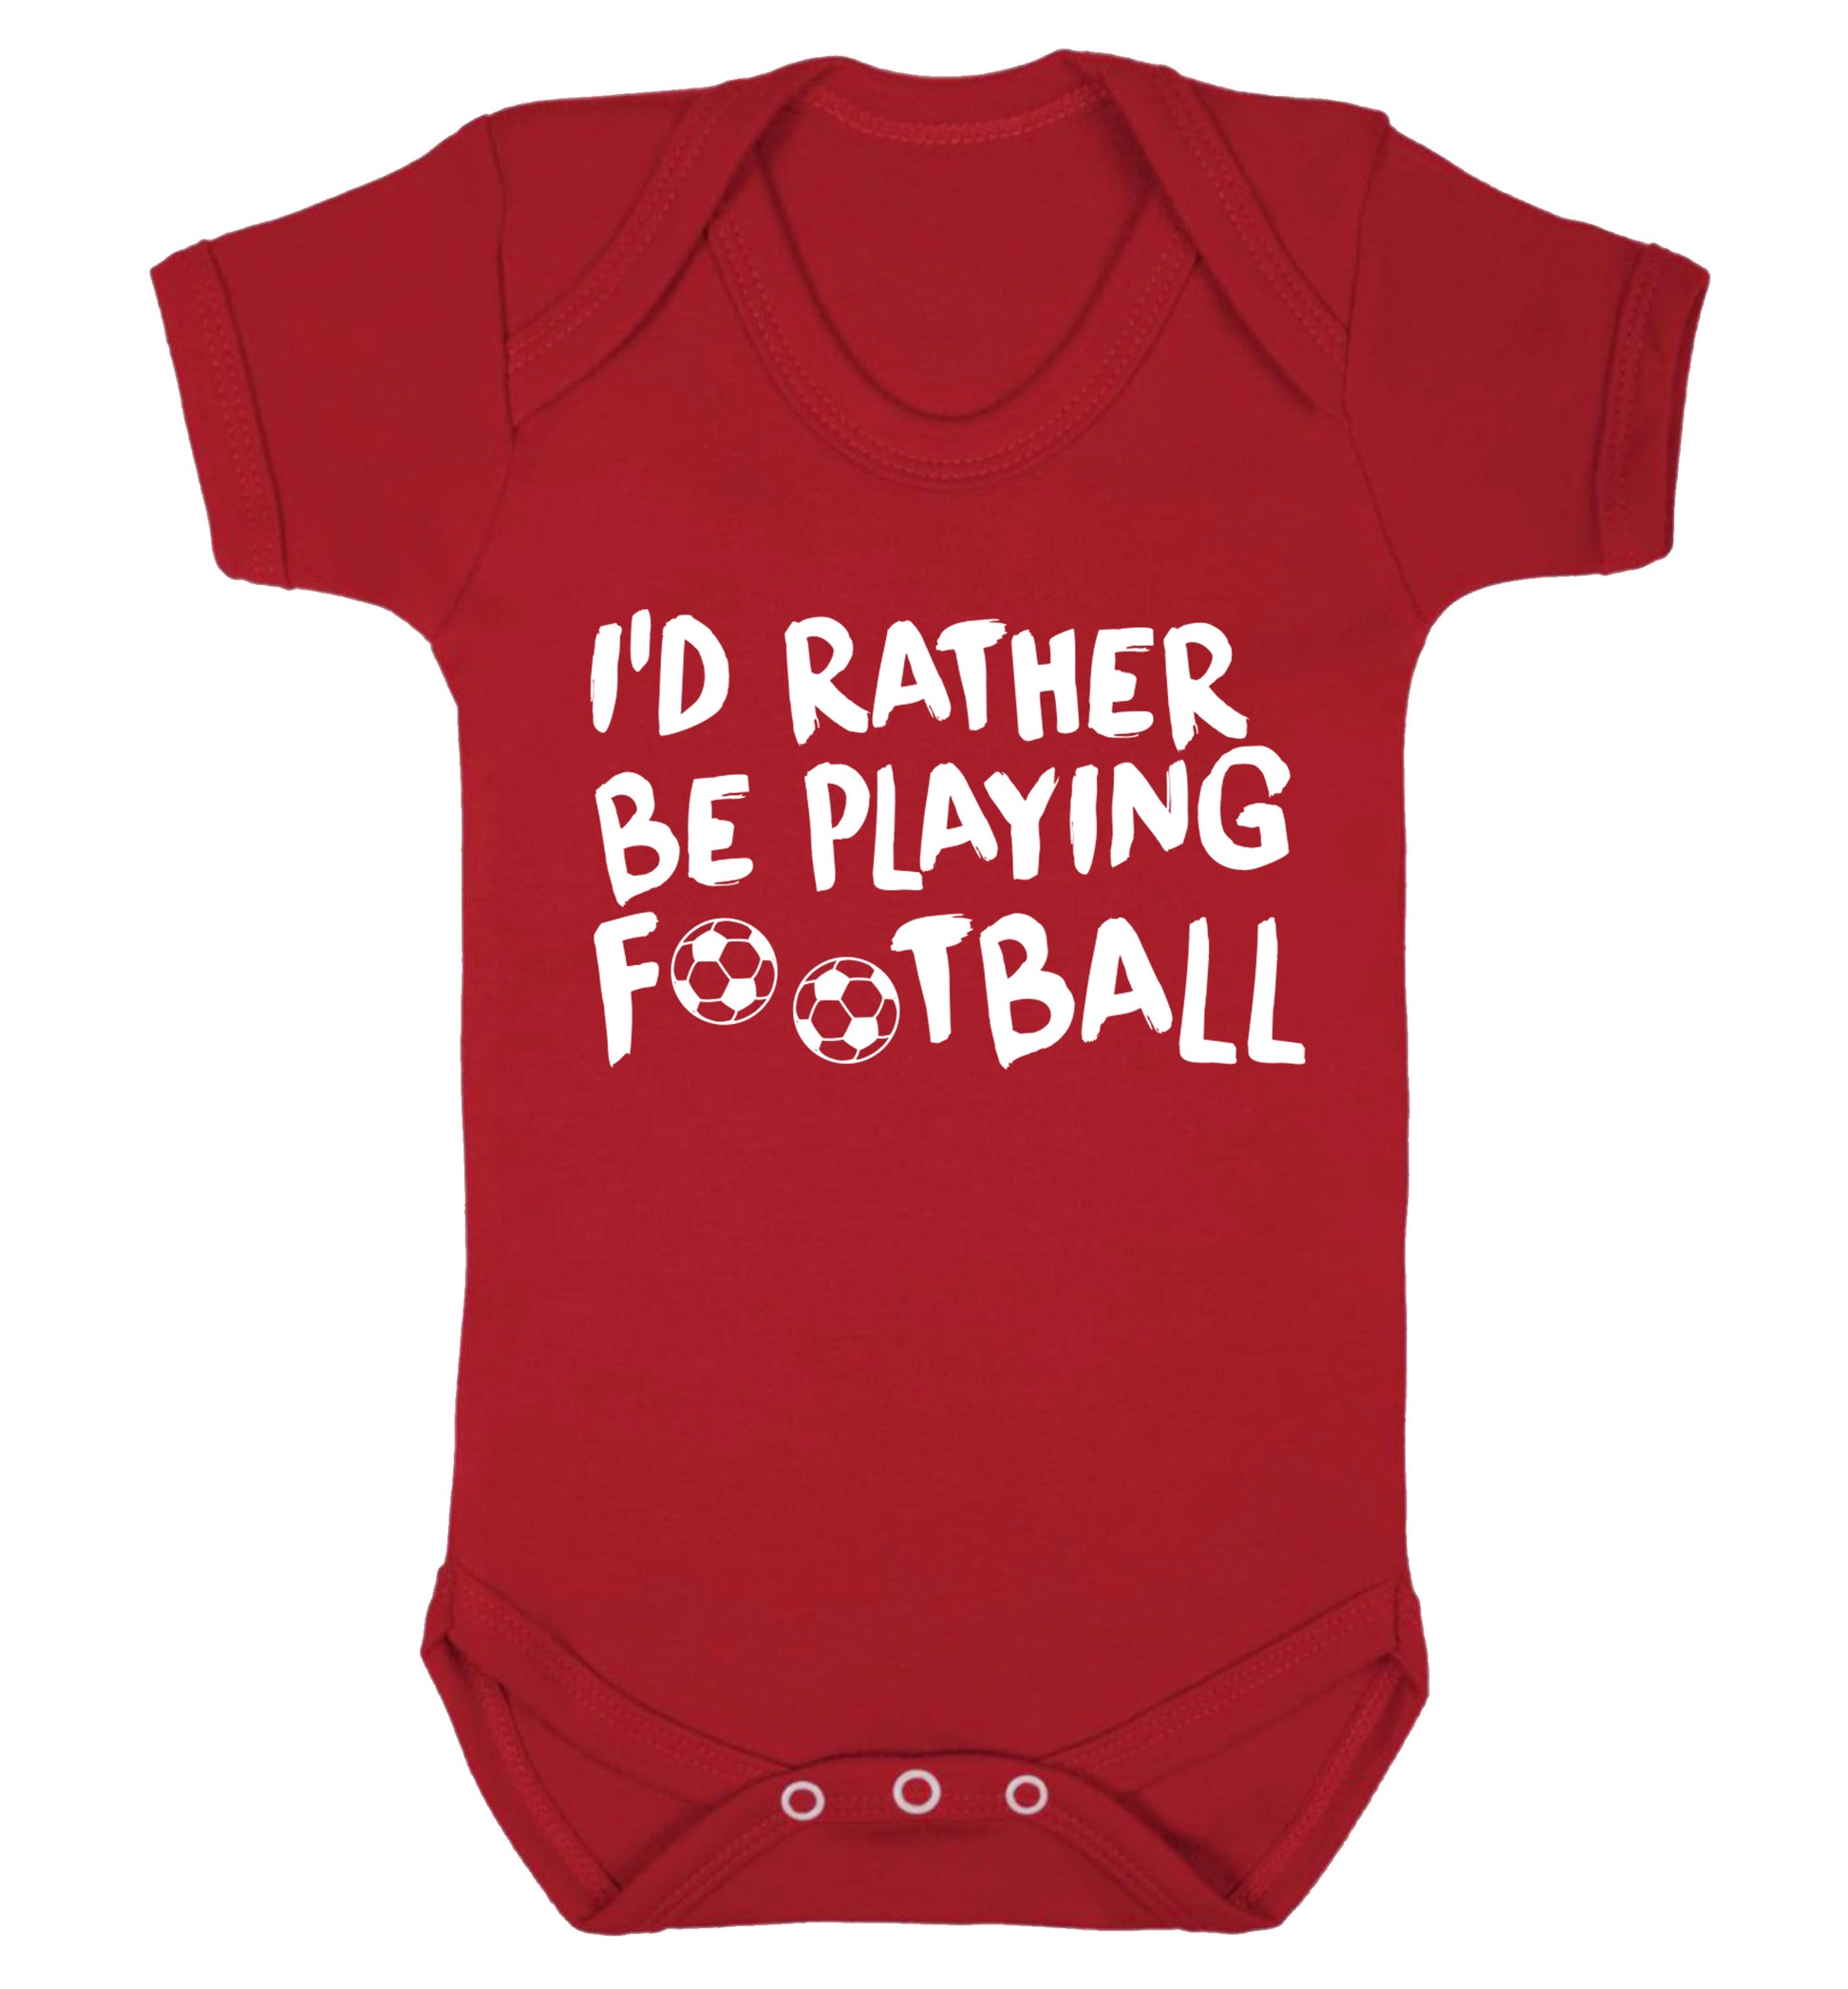 I'd rather be playing football Baby Vest red 18-24 months